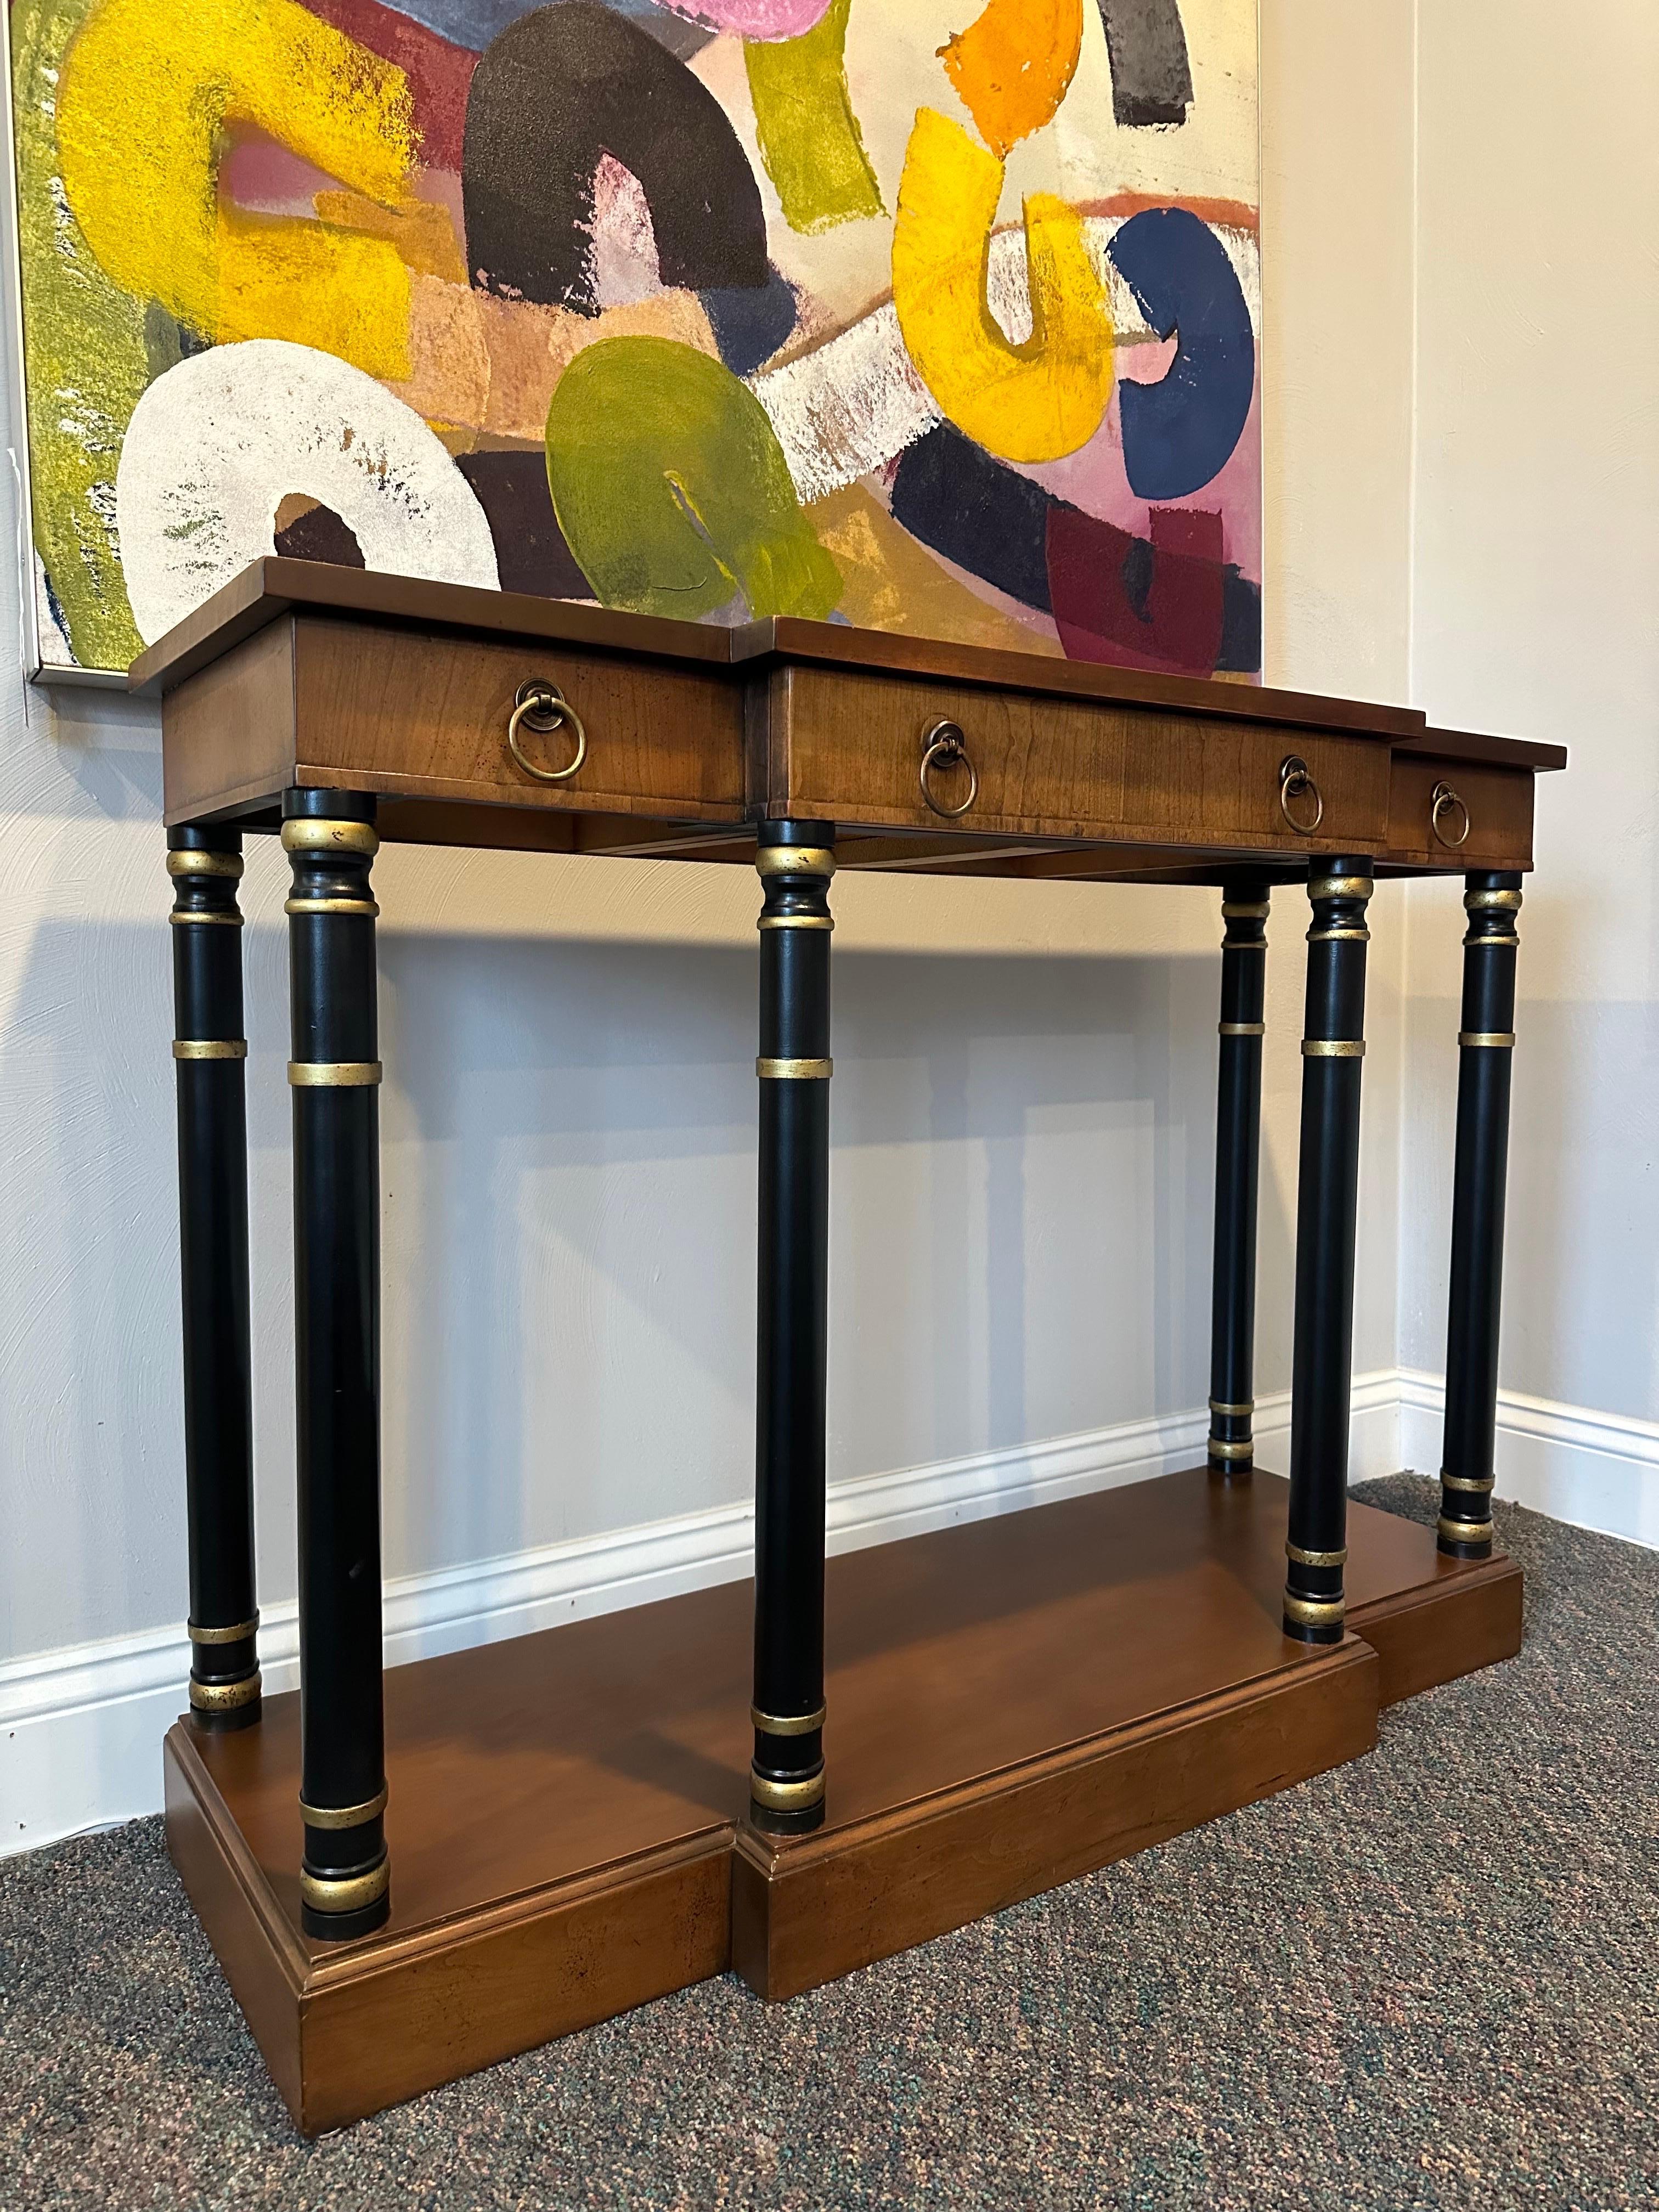 Impressive pair of neoclassical style console table or sideboards. The tables showcase exquisite graining, adorned with decorative brass pulls and complemented by ebonized columned pillars, showcasing impressive craftsmanship and attention to